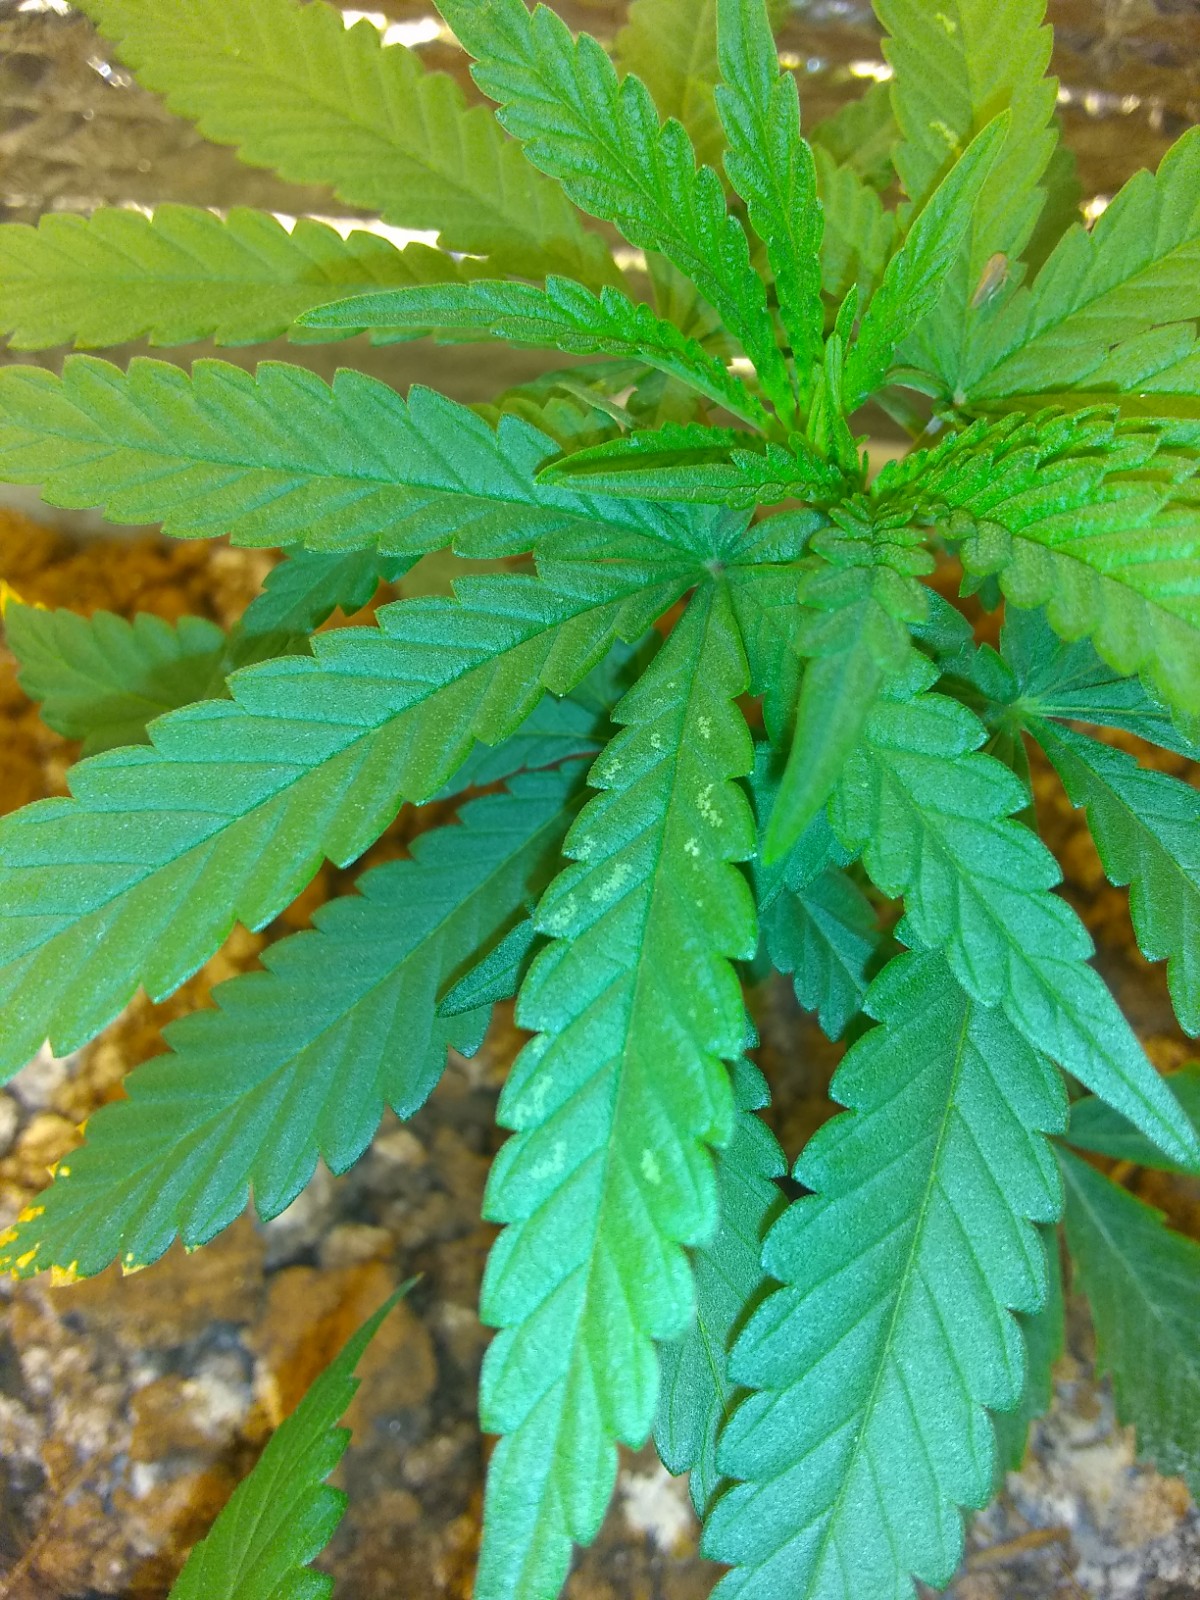 What are these discolorations on the leaves 2